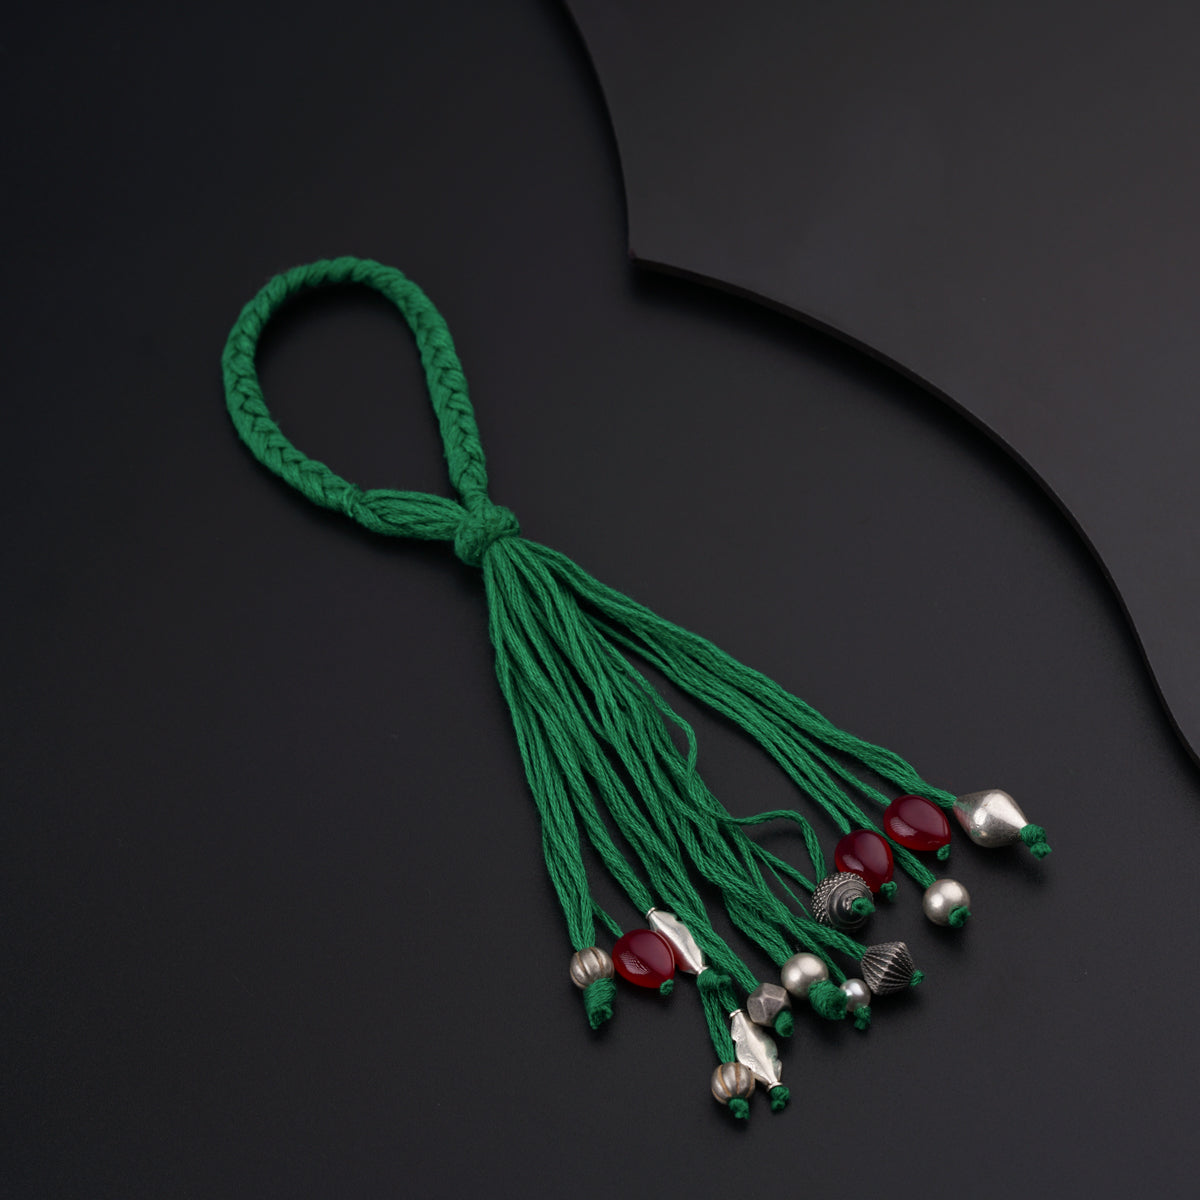 a green string with bells and beads on a black surface